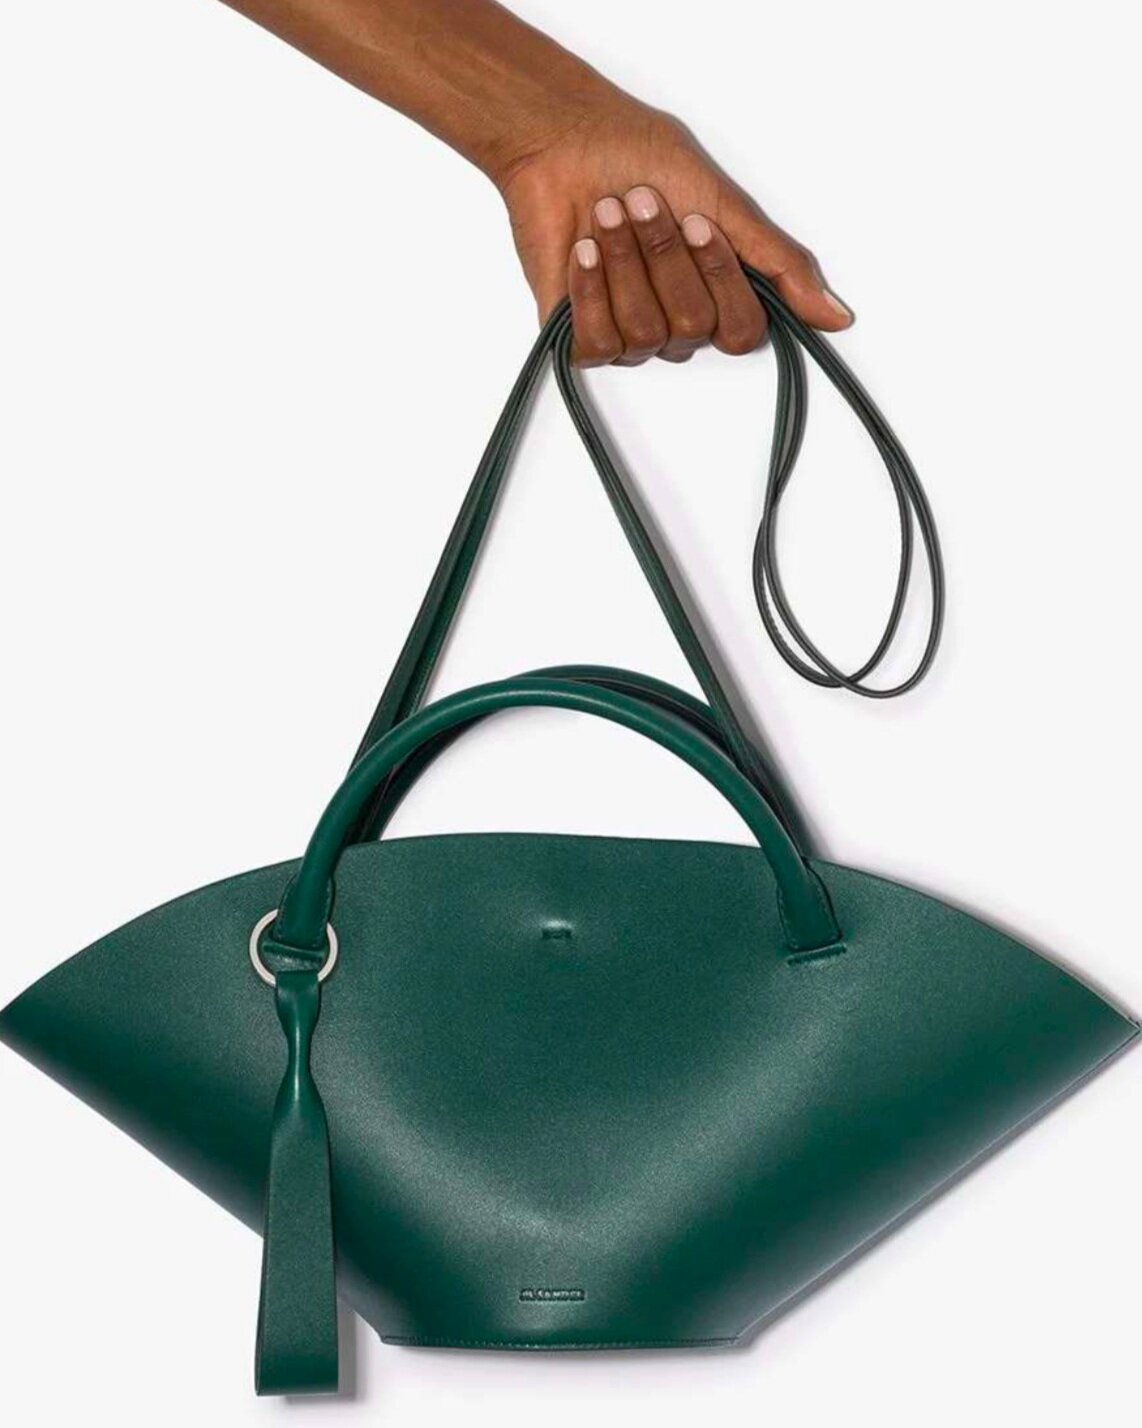  A neutral  green handbag  can work well with most earth tones. 